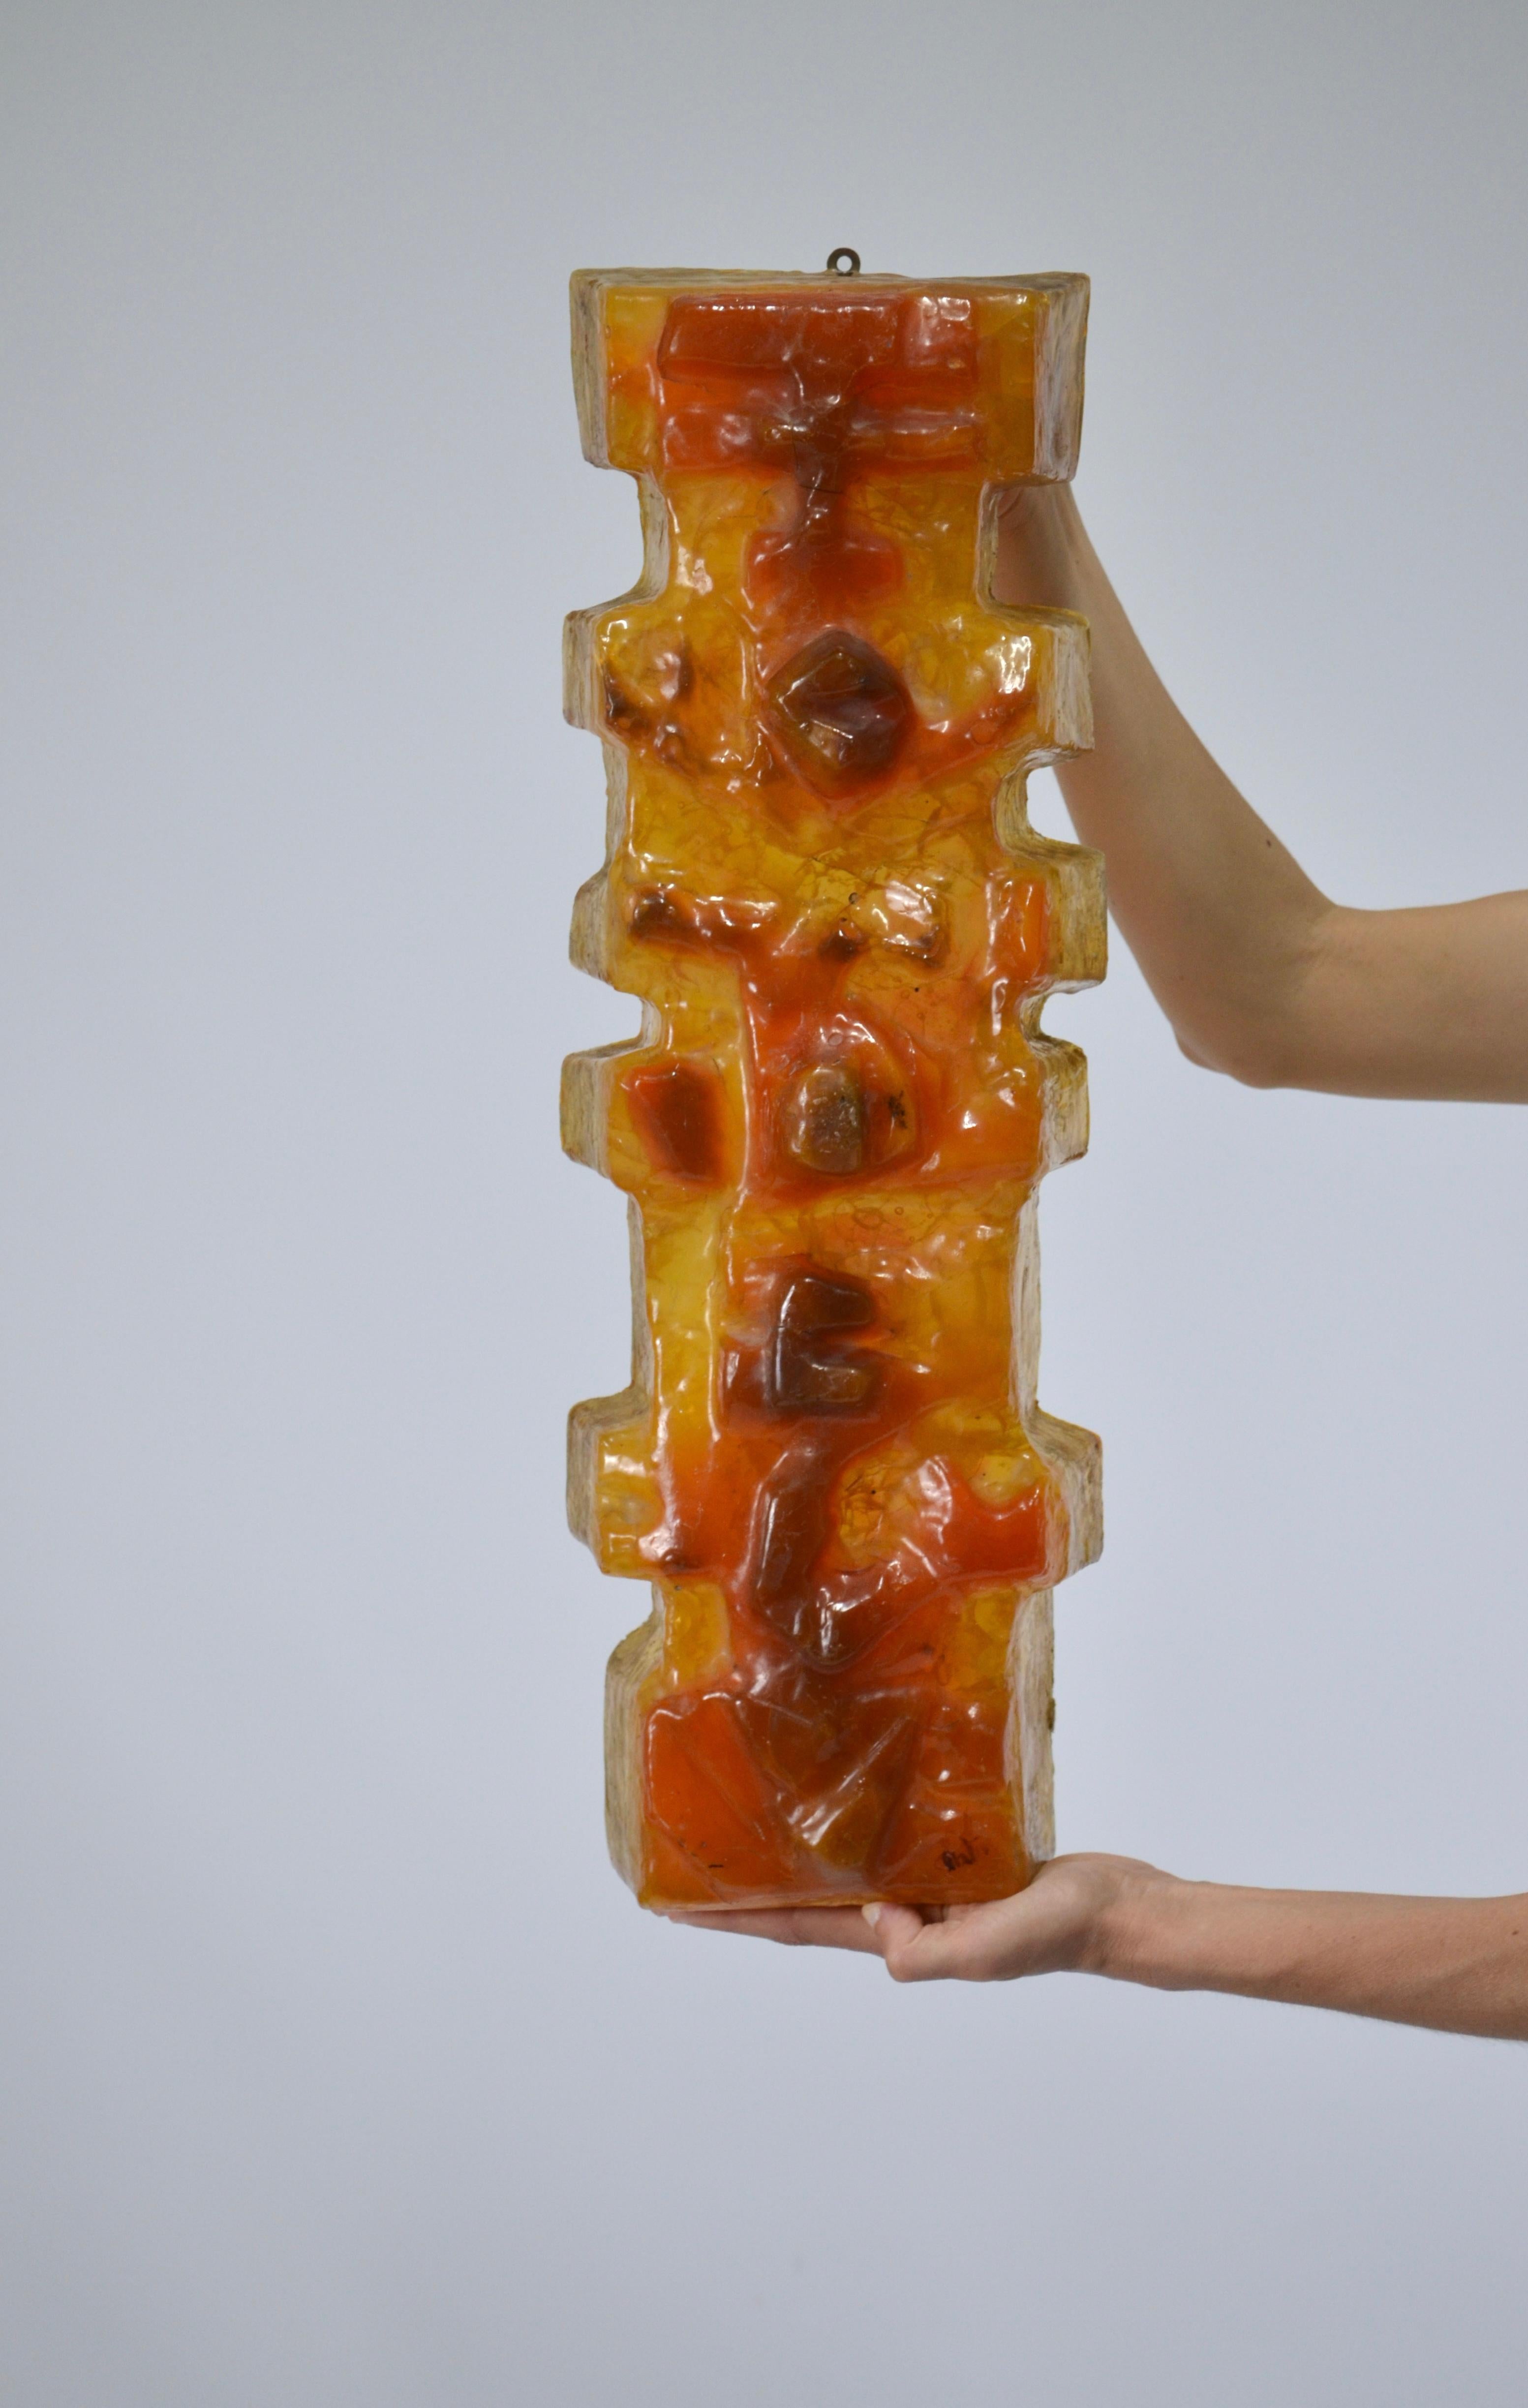 Brutalist sculpture from the 70s, in fractal resin. 
This material is made by passing an electric current through the resin, which gives it the appearance of amber-colored crystals or cracked ice.
It can be illuminated and thus used as a wall lamp